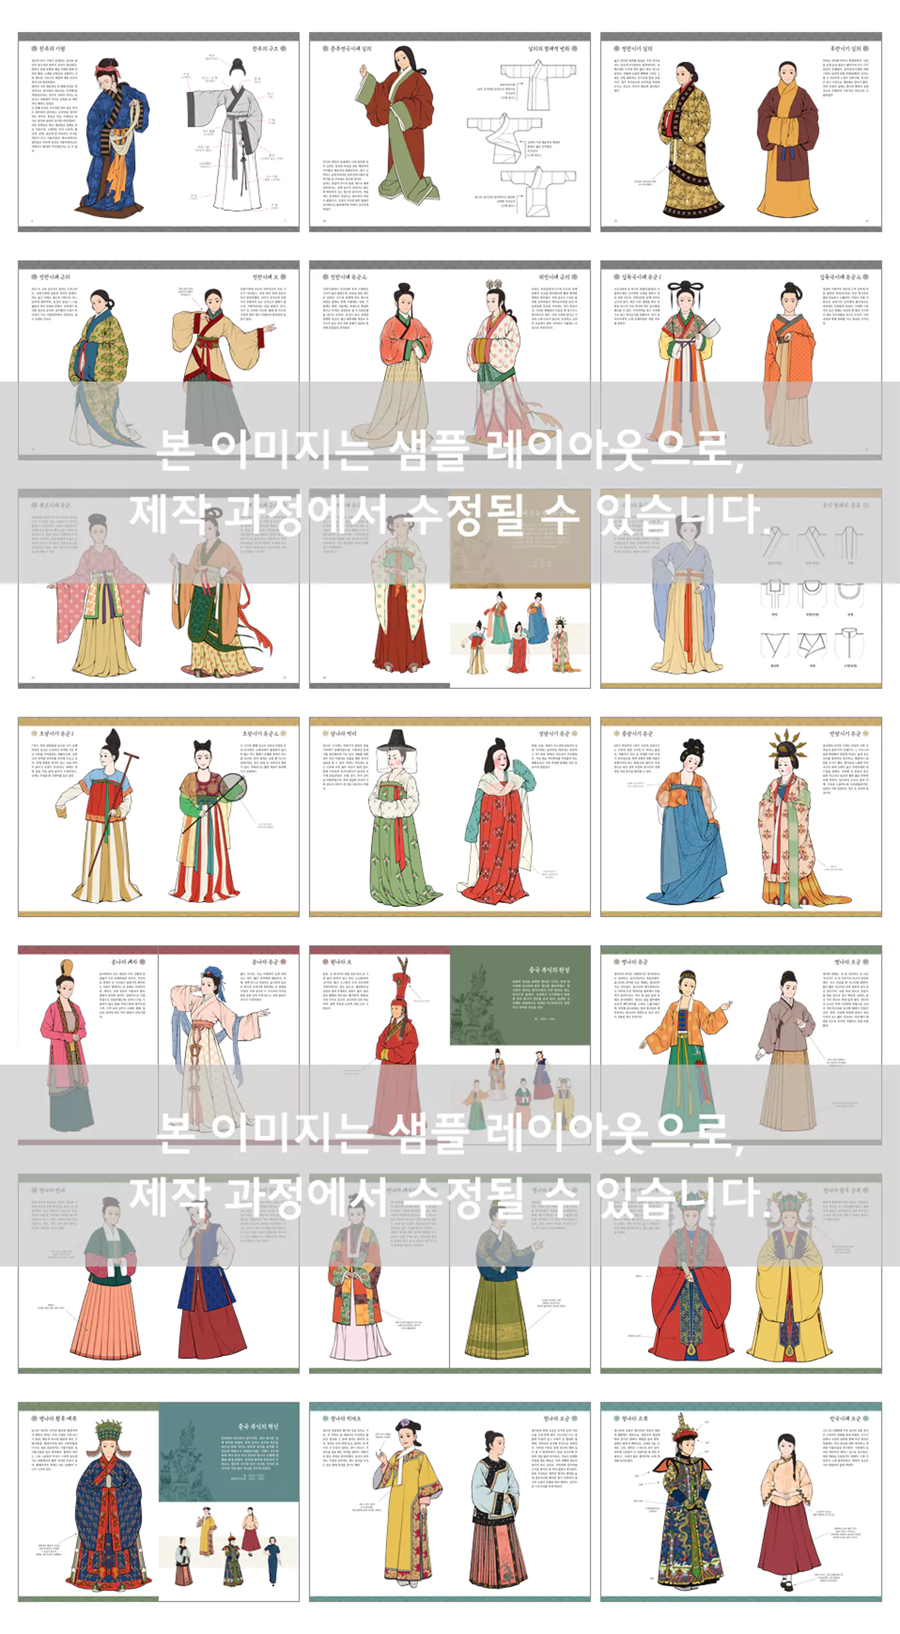 Chinese Clothing History by Glimja on DeviantArt